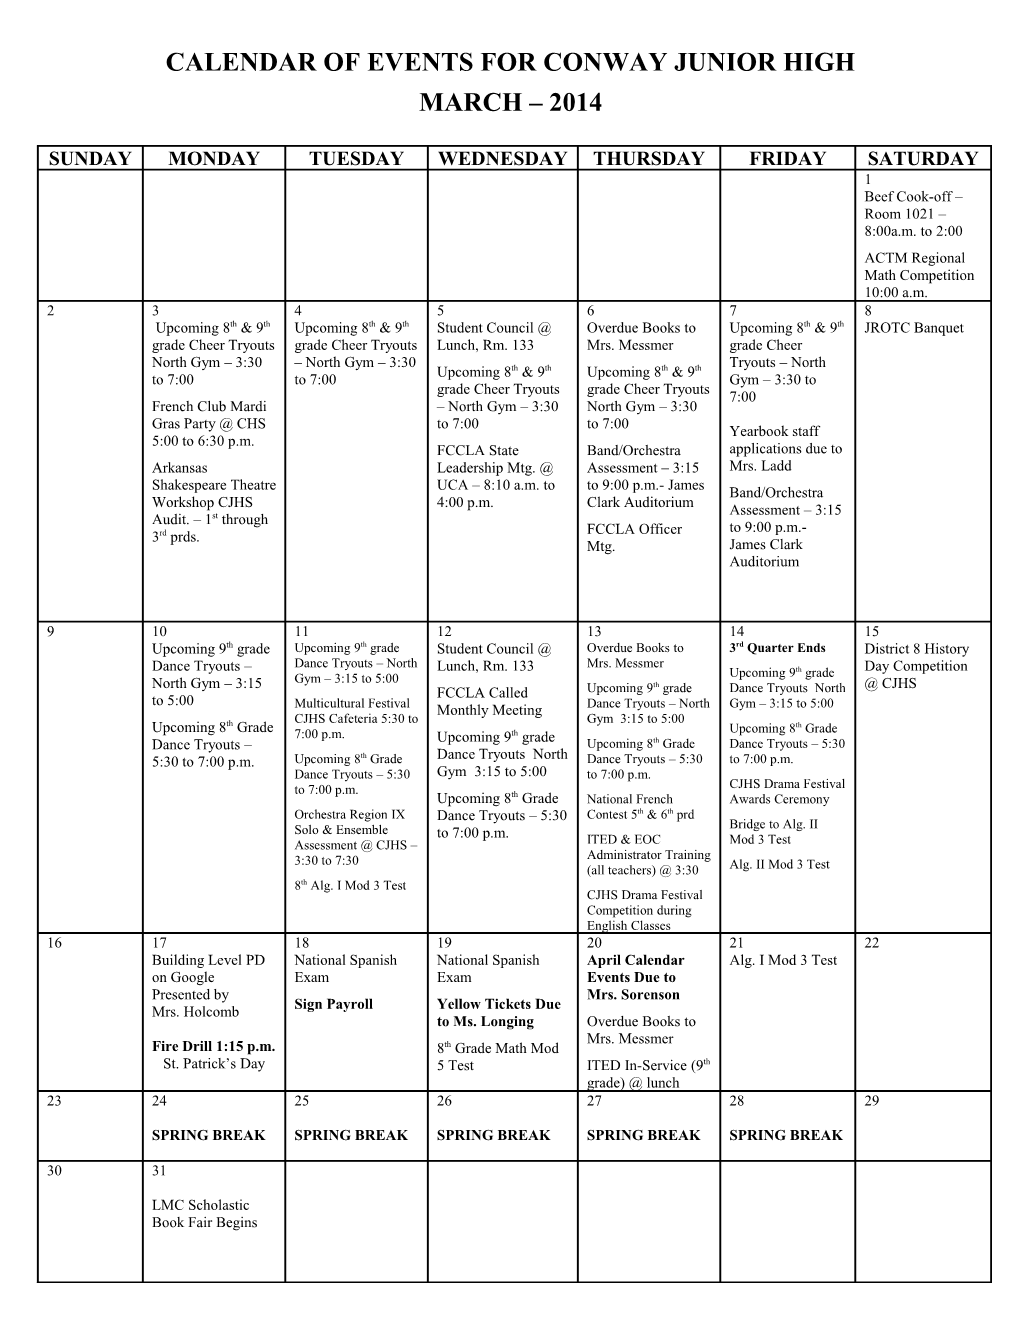 Calendar of Events for Chs-East Campus